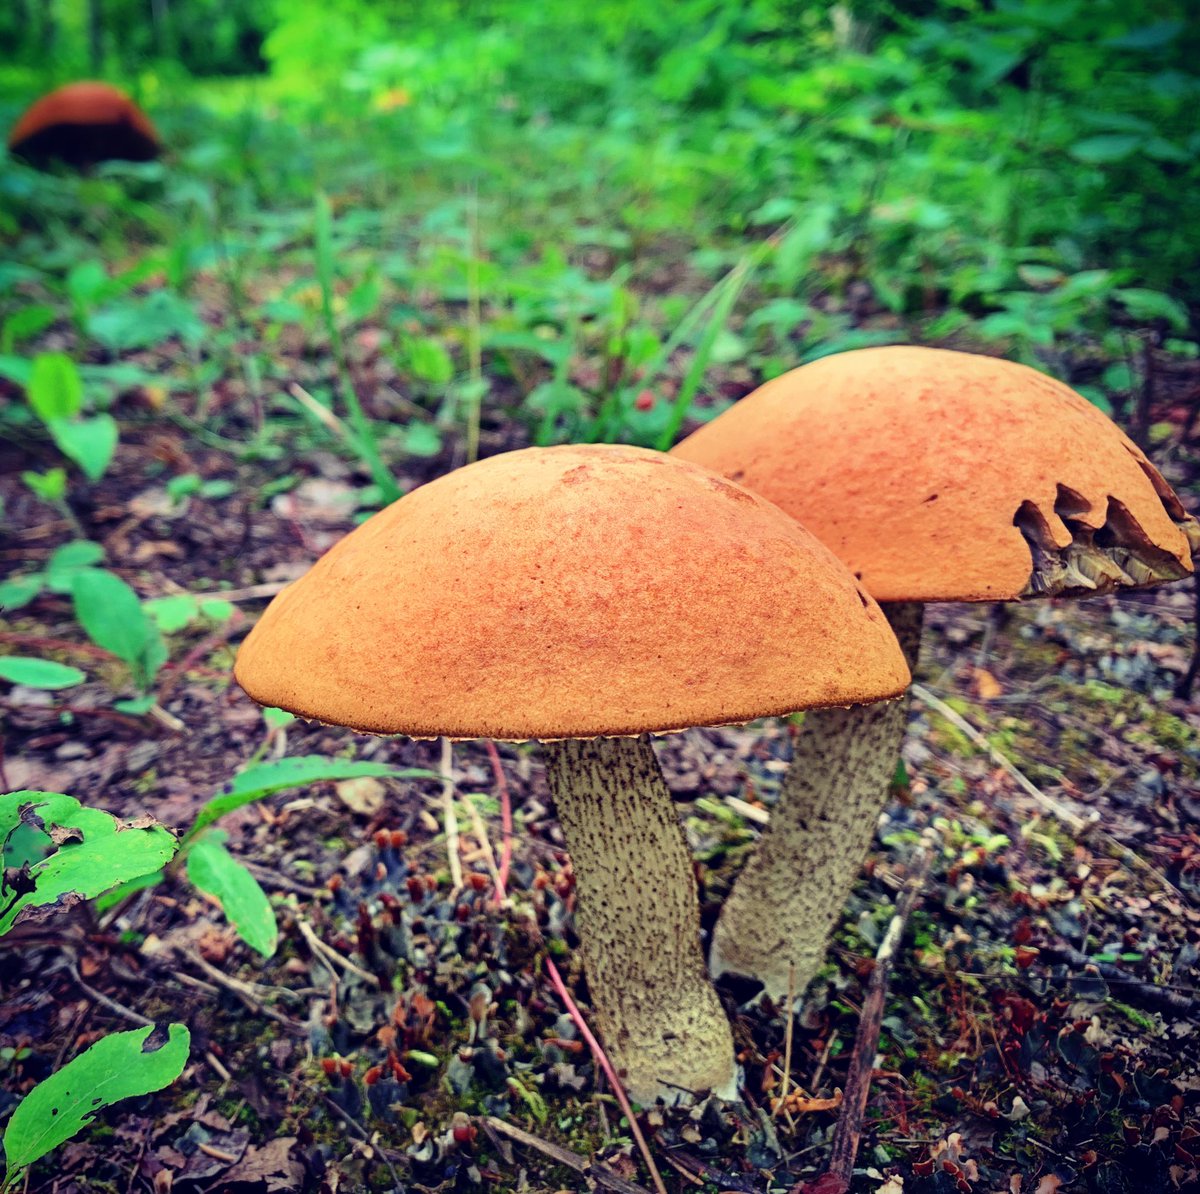 Mushrooms 🍄 in the forest. Get this pic & more for your next project. Link here 👉🏼 blissismymuse.ca/index.php/phot… . . .  #mushrooms #mushroom #macrophotography #closeup #naturelover #earthofficial #ourplanetdaily #whywelovenature #NaturePhotography #fantastic_earth #discovernature